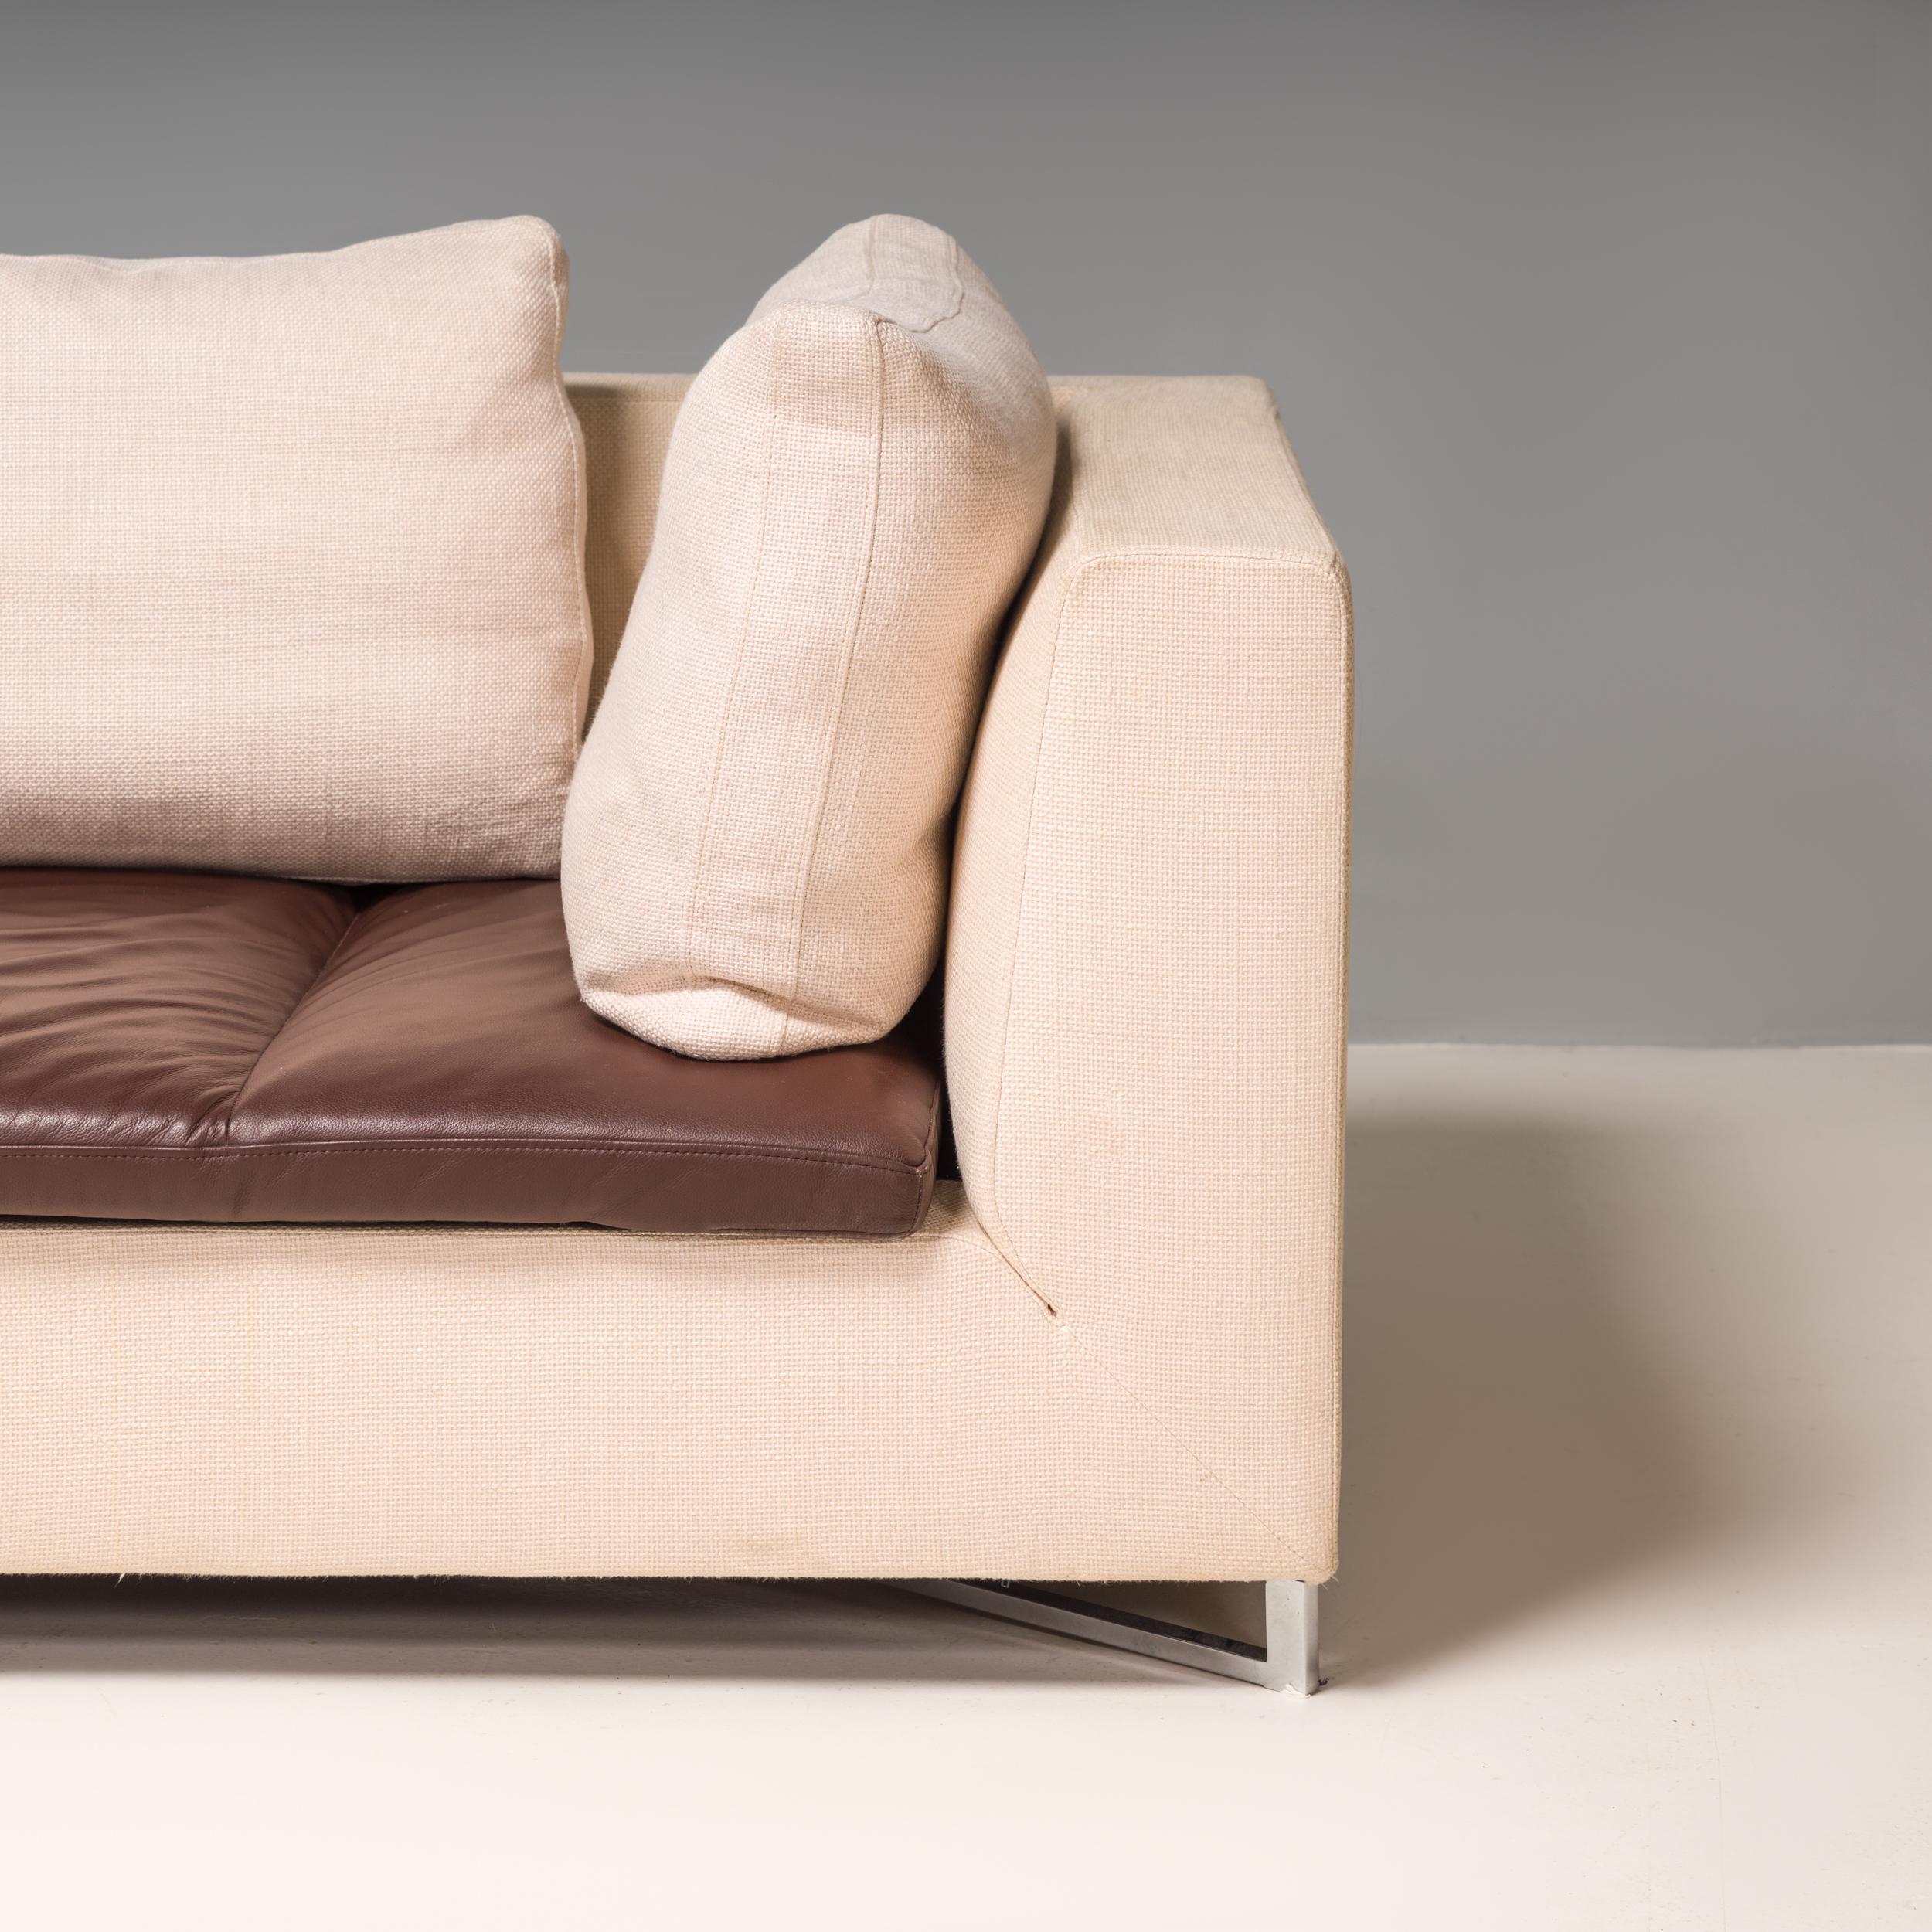 Ligne Roset by Didier Gomez Feng Ivory and Brown Leather Three-Seat Sofa In Good Condition For Sale In London, GB